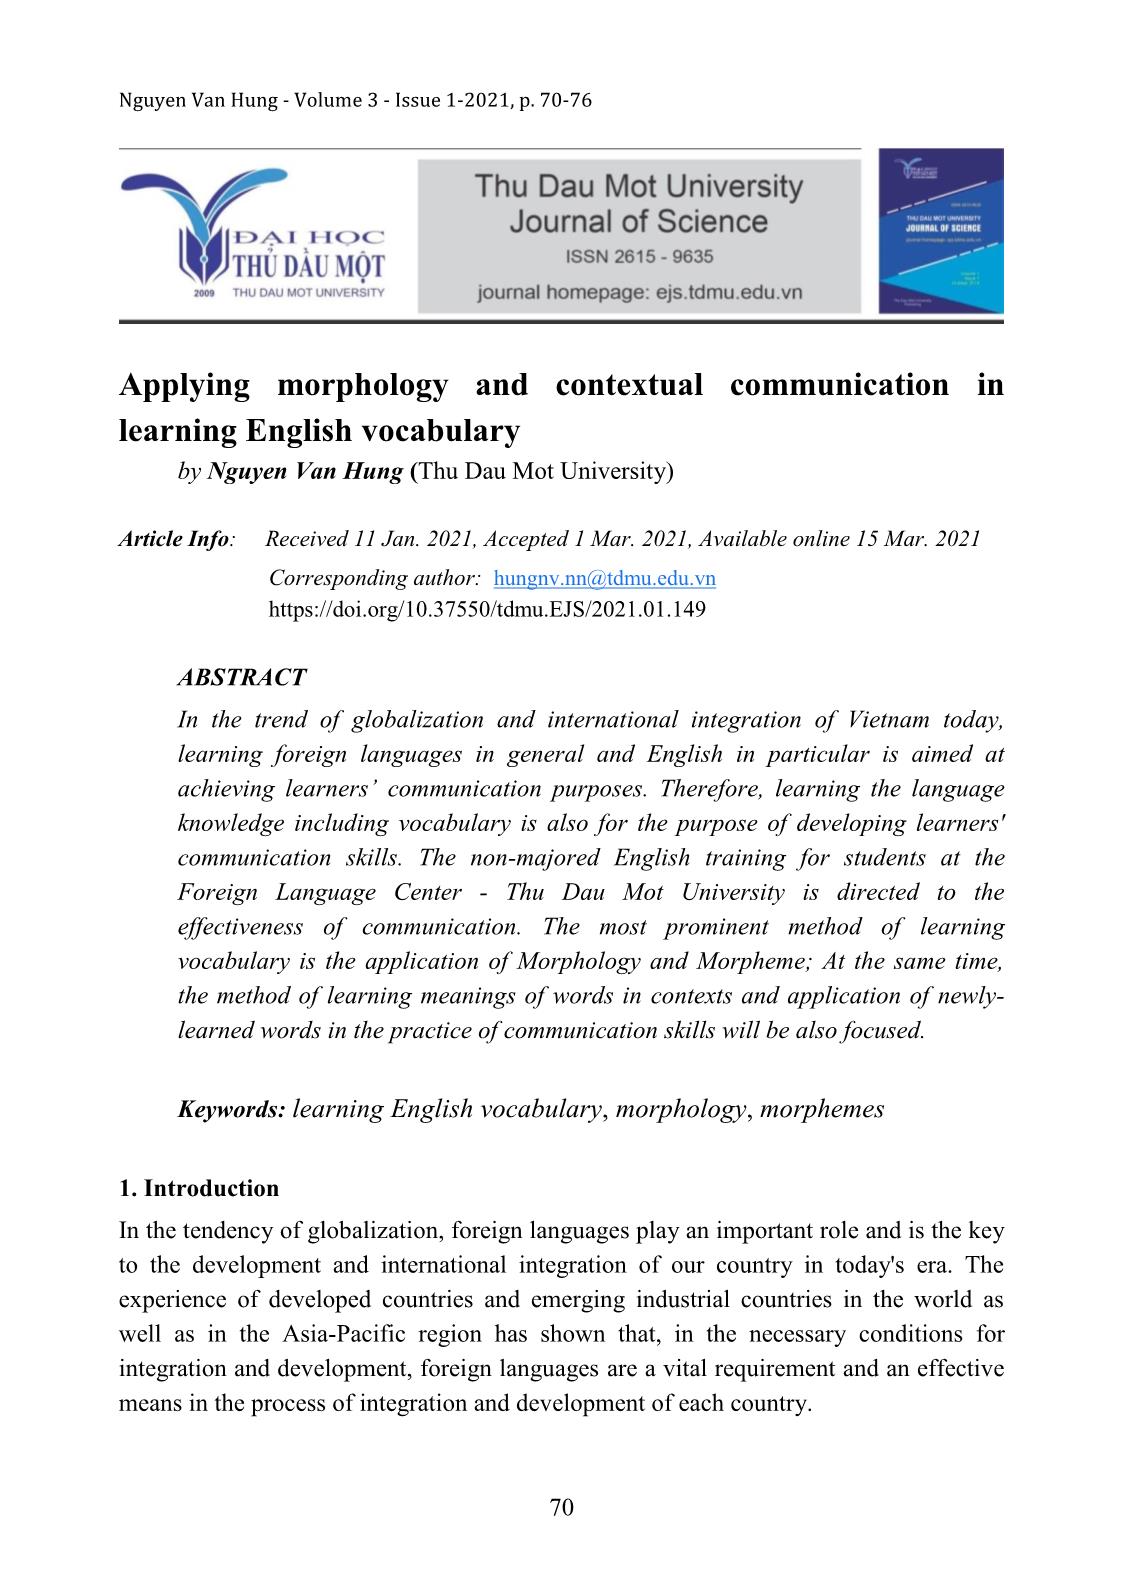 Applying morphology and contextual communication in learning English vocabulary trang 1